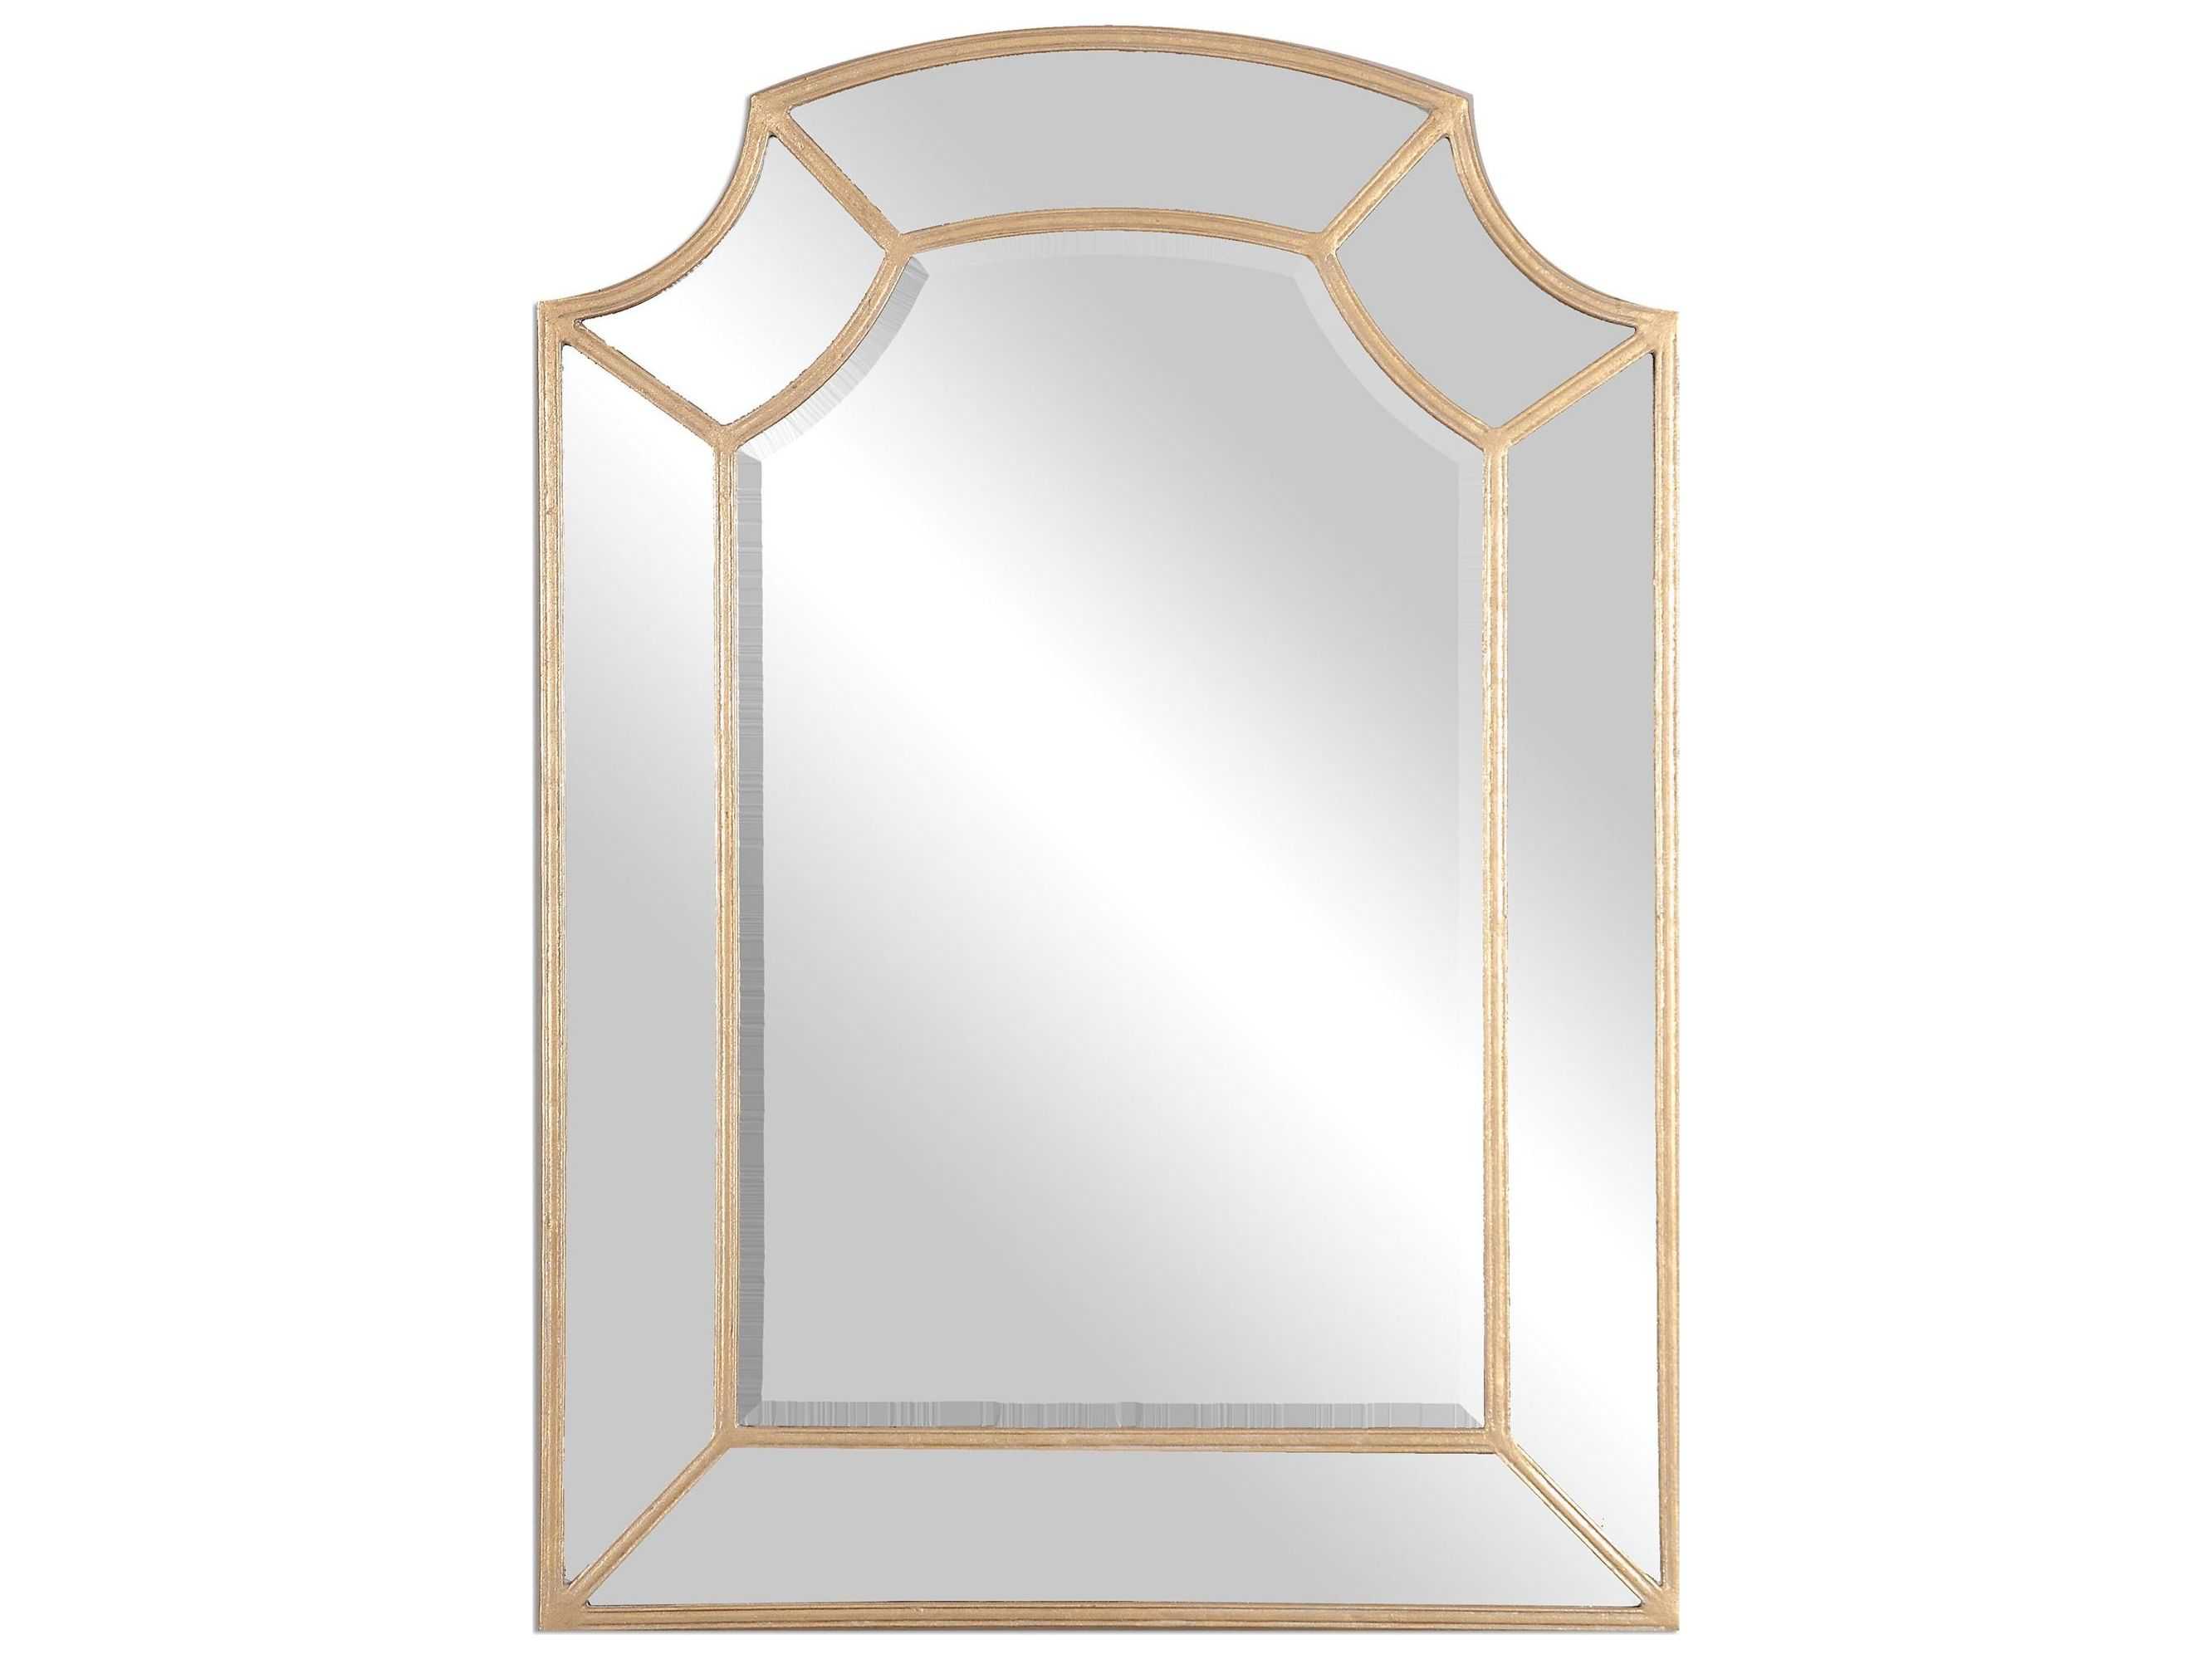 Antique Gold Arch Wall Mirror, Uttermost Wall Mirror Antique